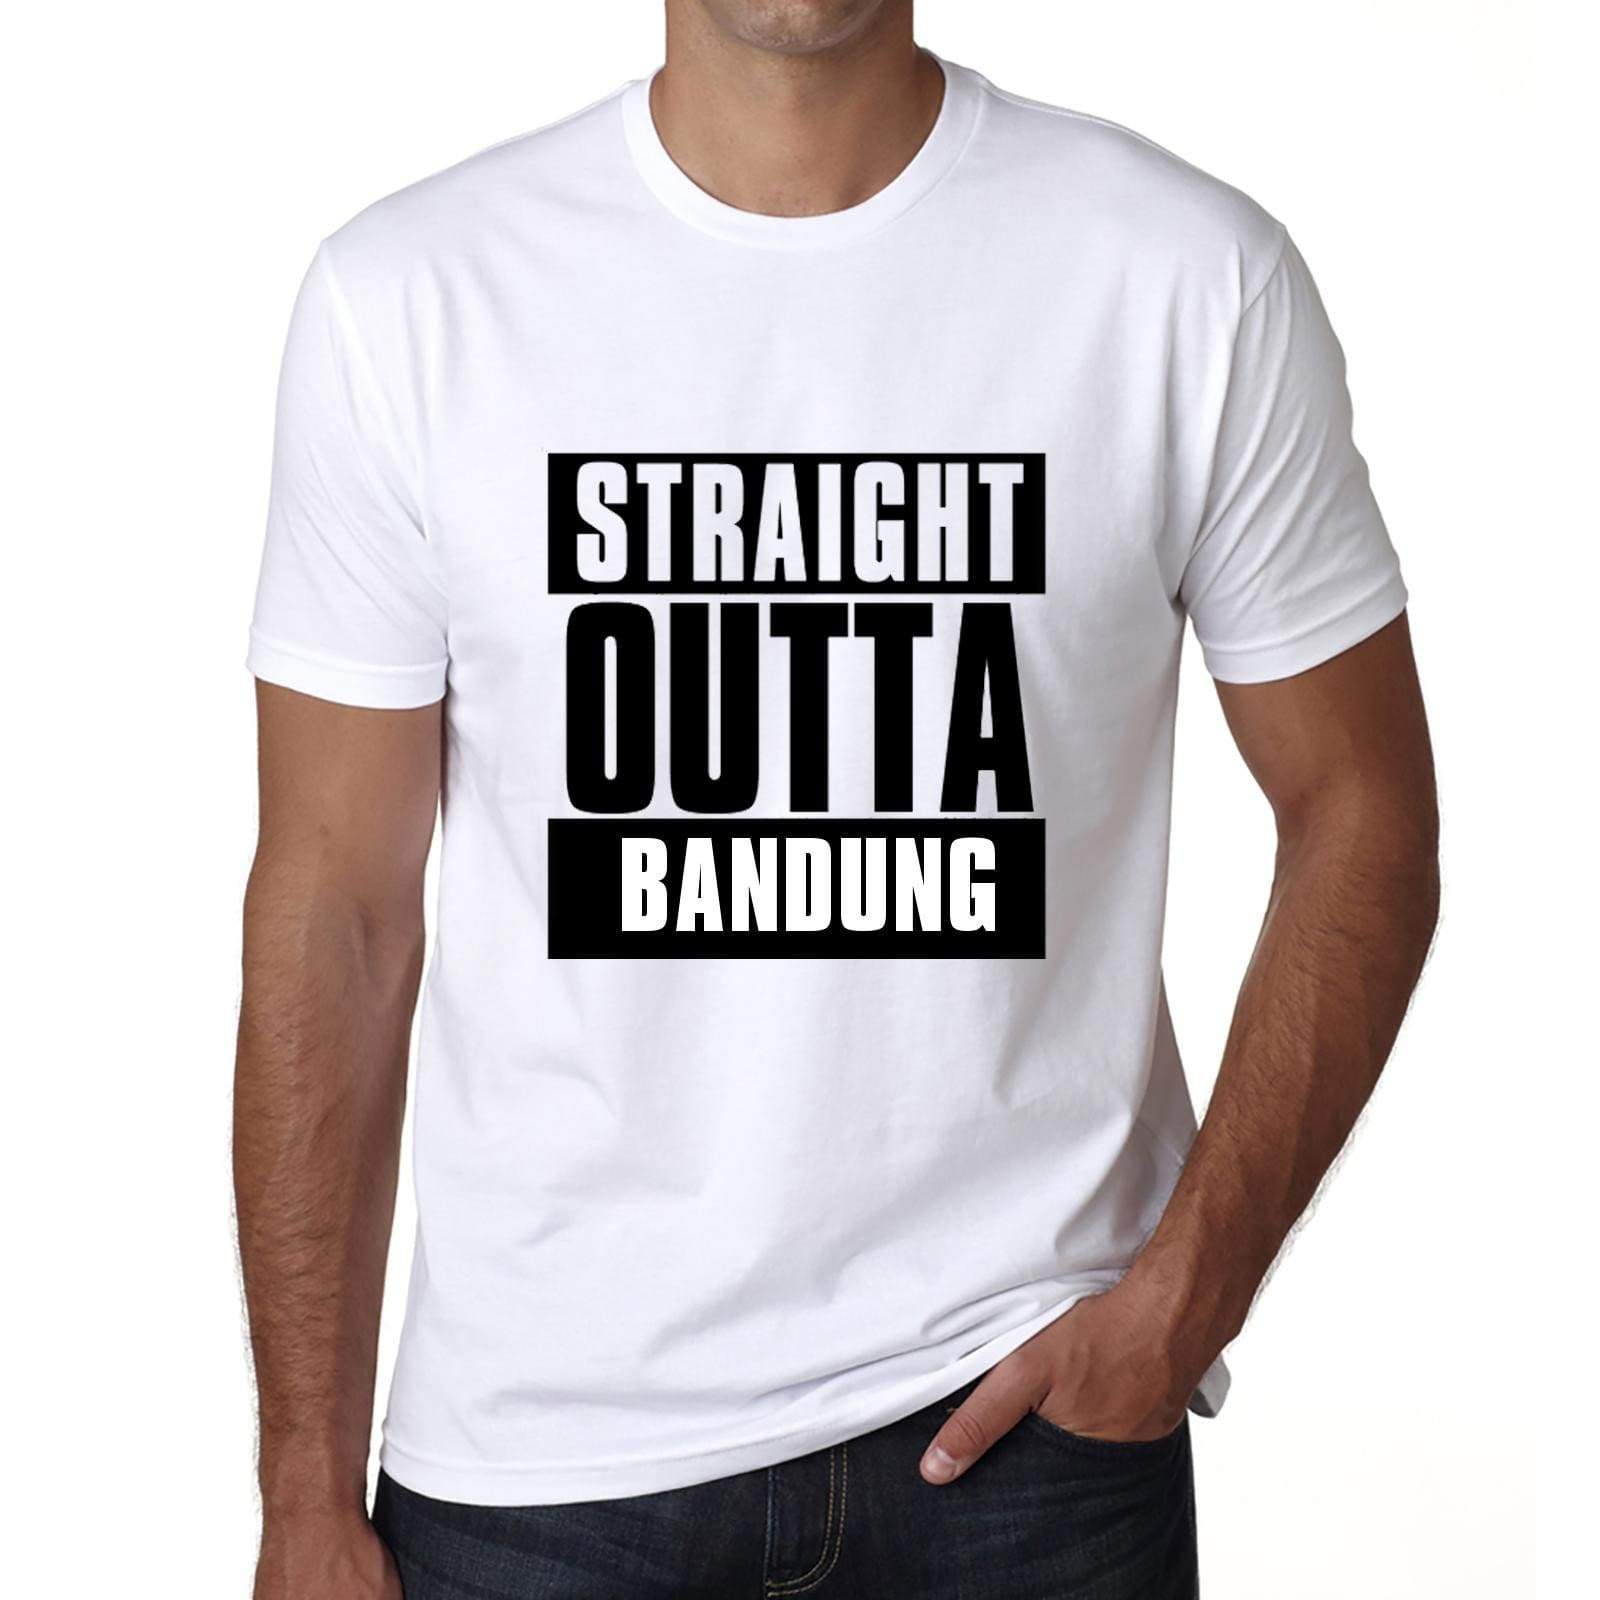 Straight Outta Bandung Mens Short Sleeve Round Neck T-Shirt 00027 - White / S - Casual